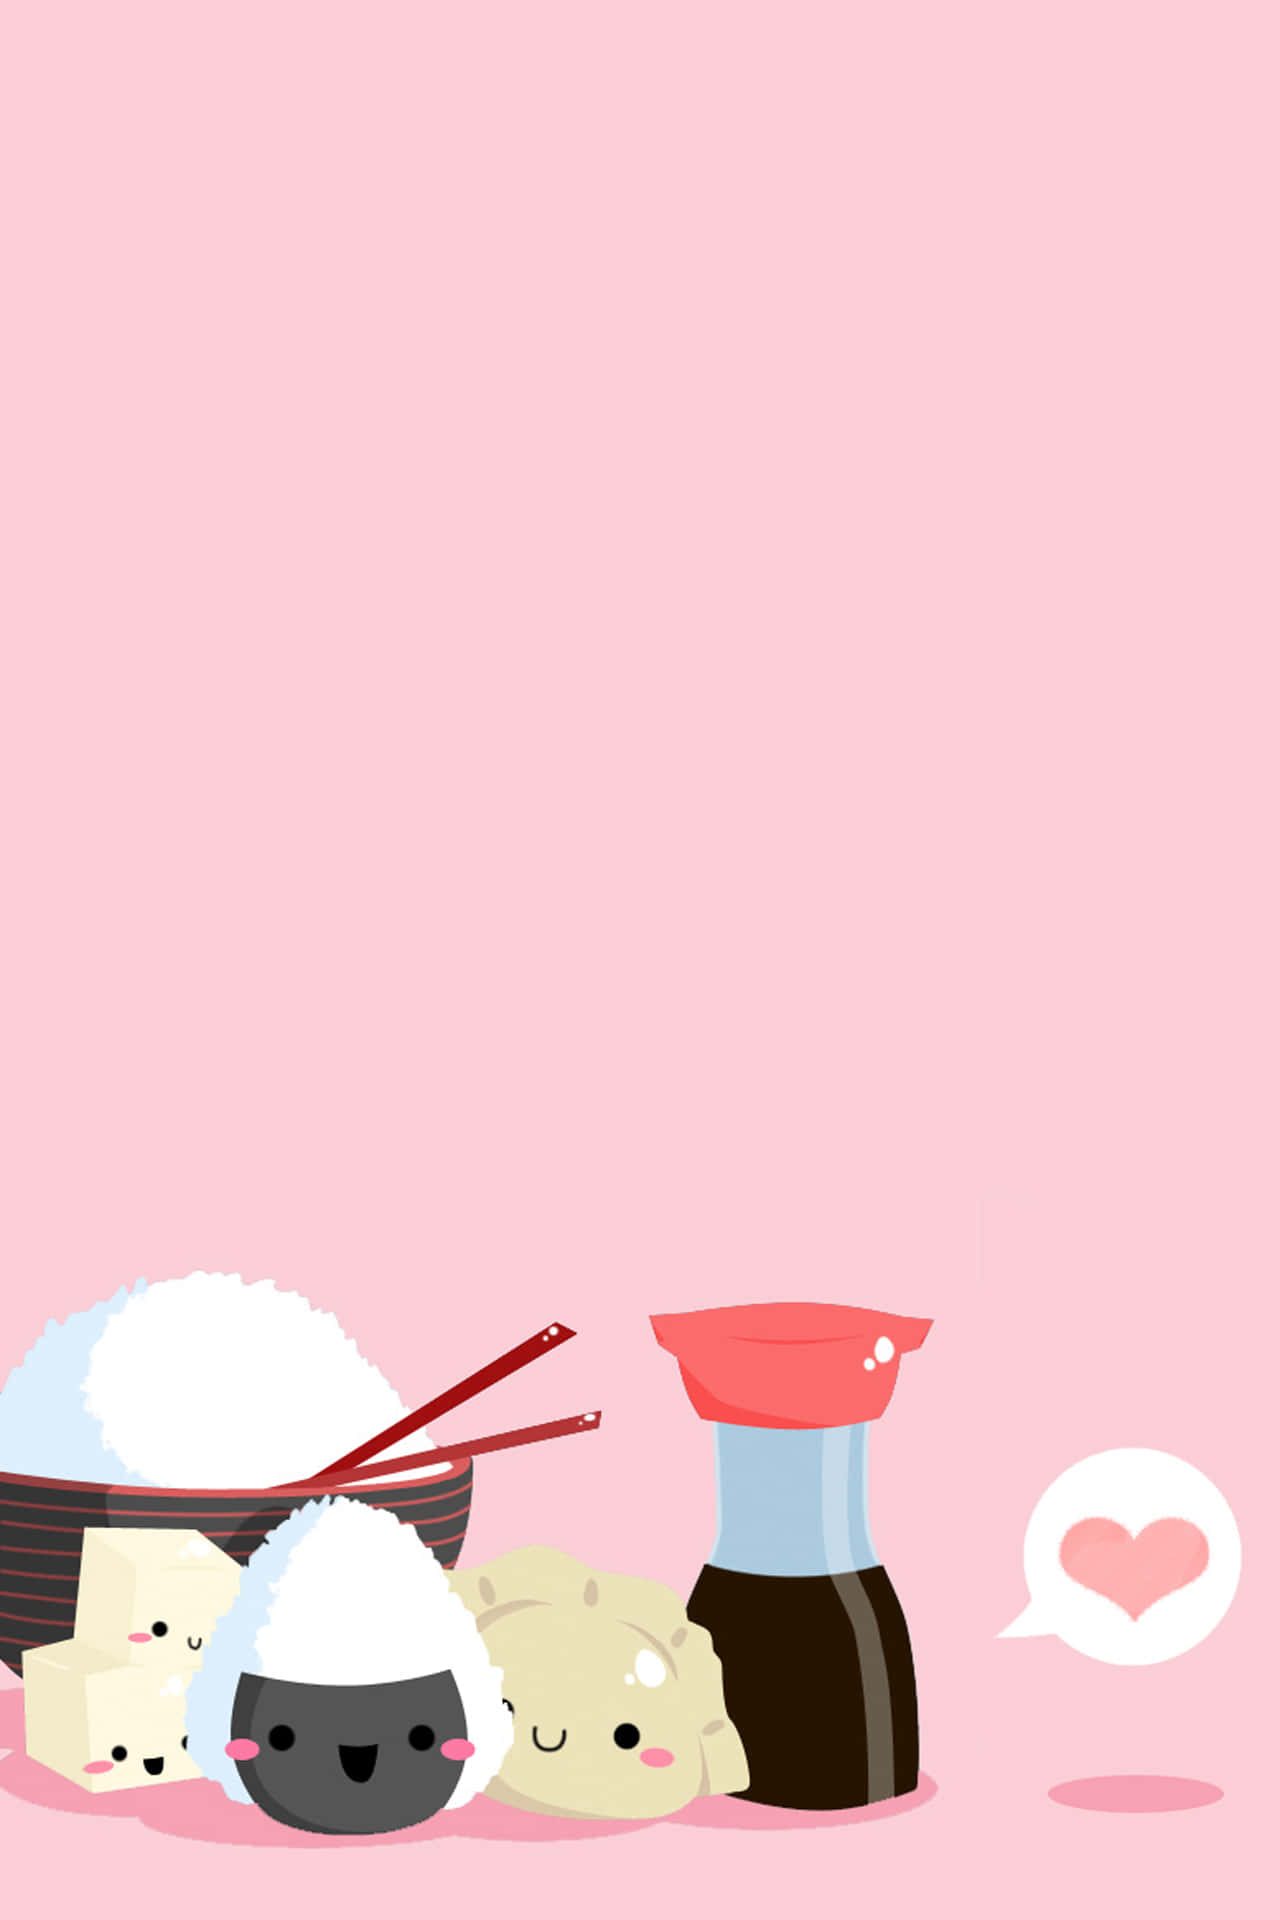 Get your appetites ready with this cute food-themed iPhone background. Wallpaper